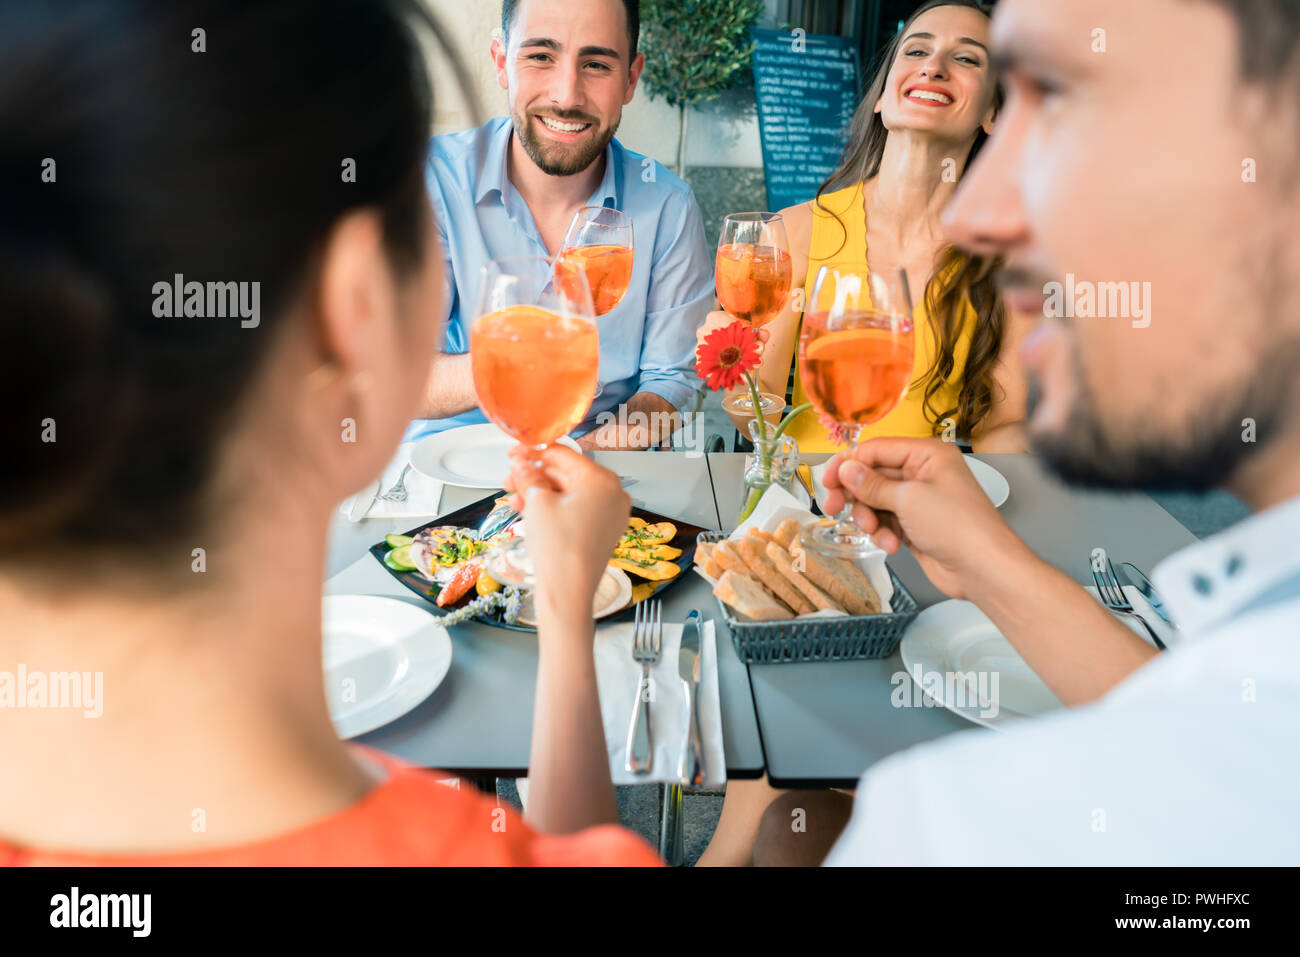 Two happy young couples toasting while sitting together at resta Stock Photo